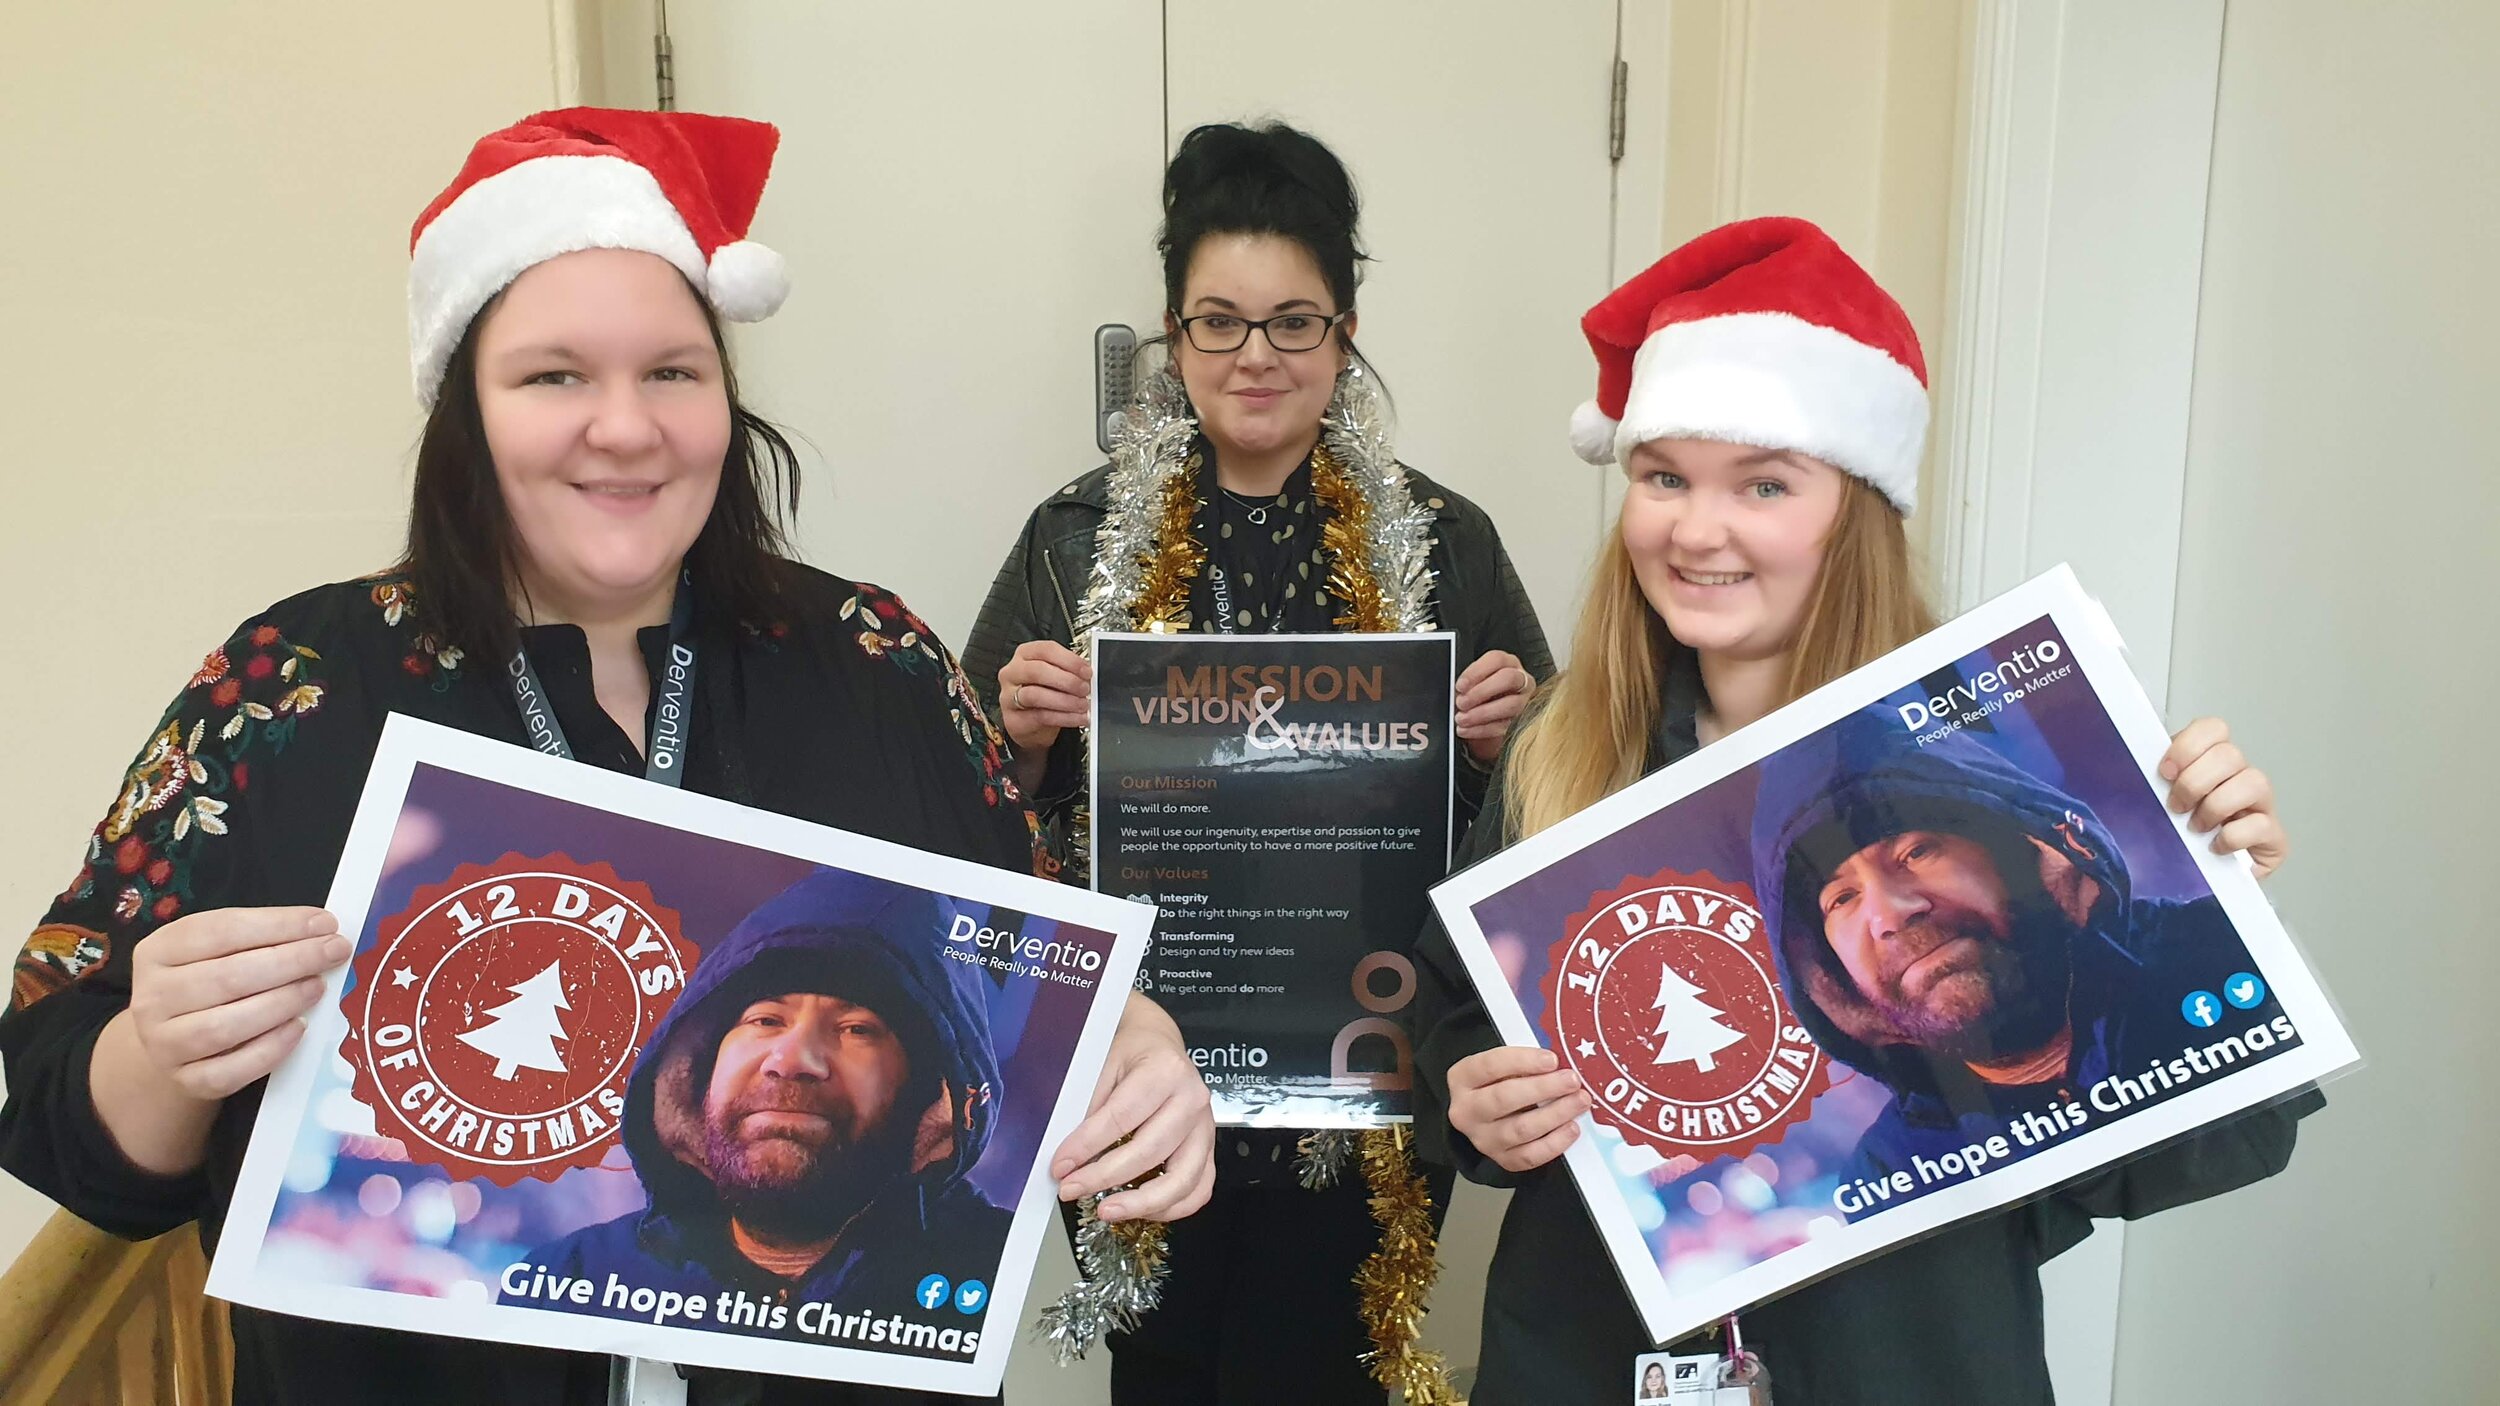 Donate unspent Xmas party cash to help homeless